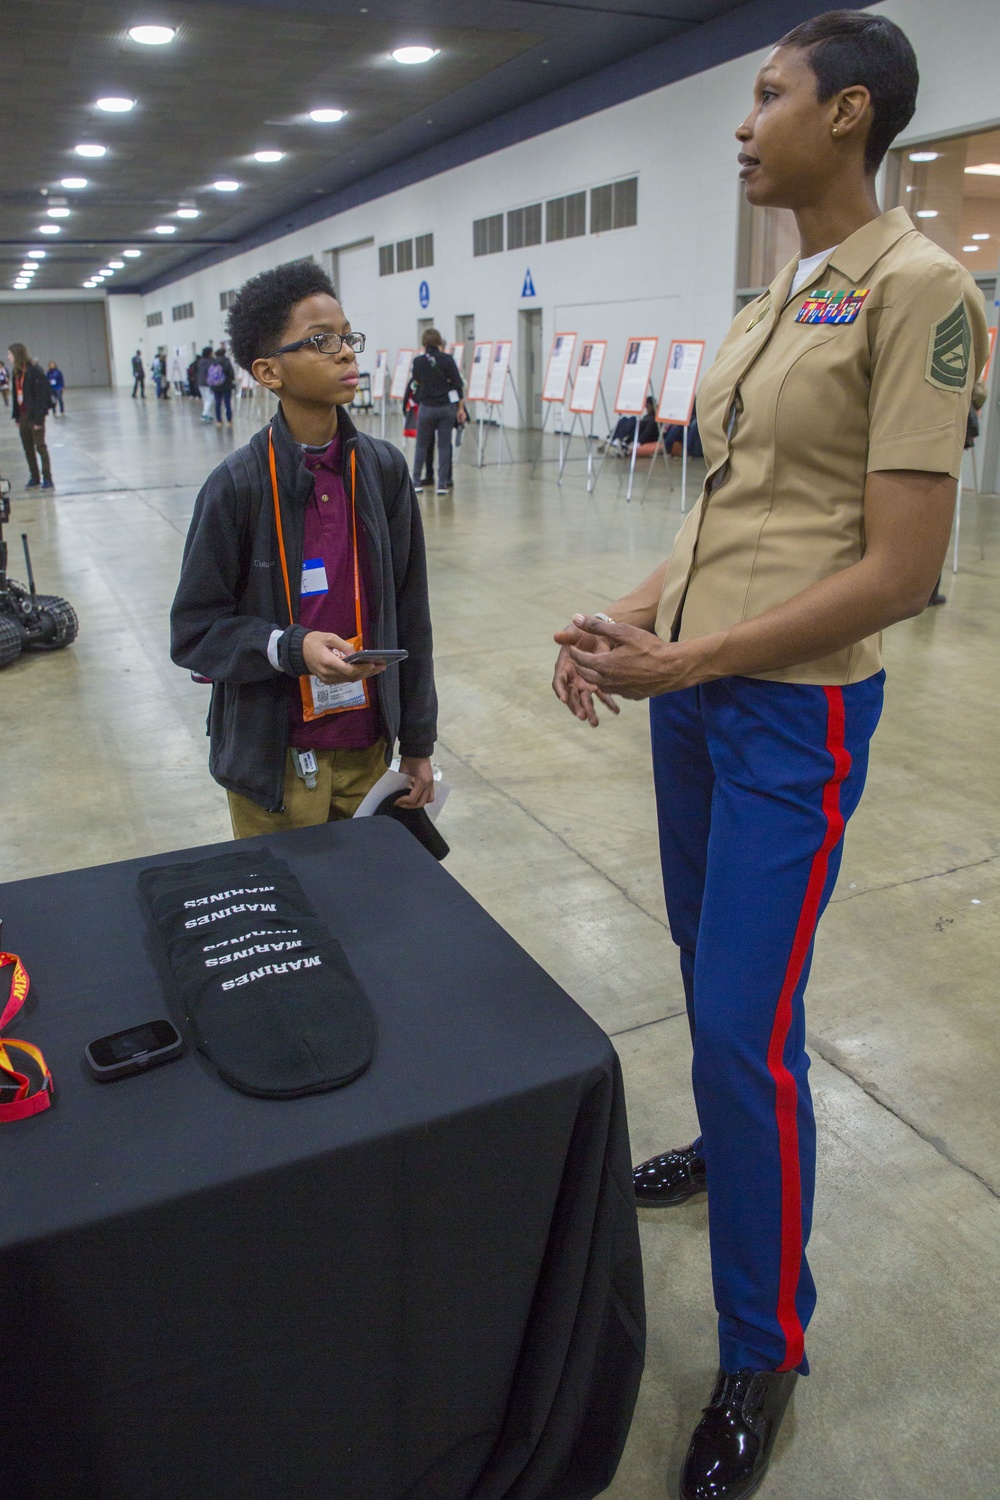 Marines showcase explosive ordnance disposal robots during National Society of Black Engineers festival